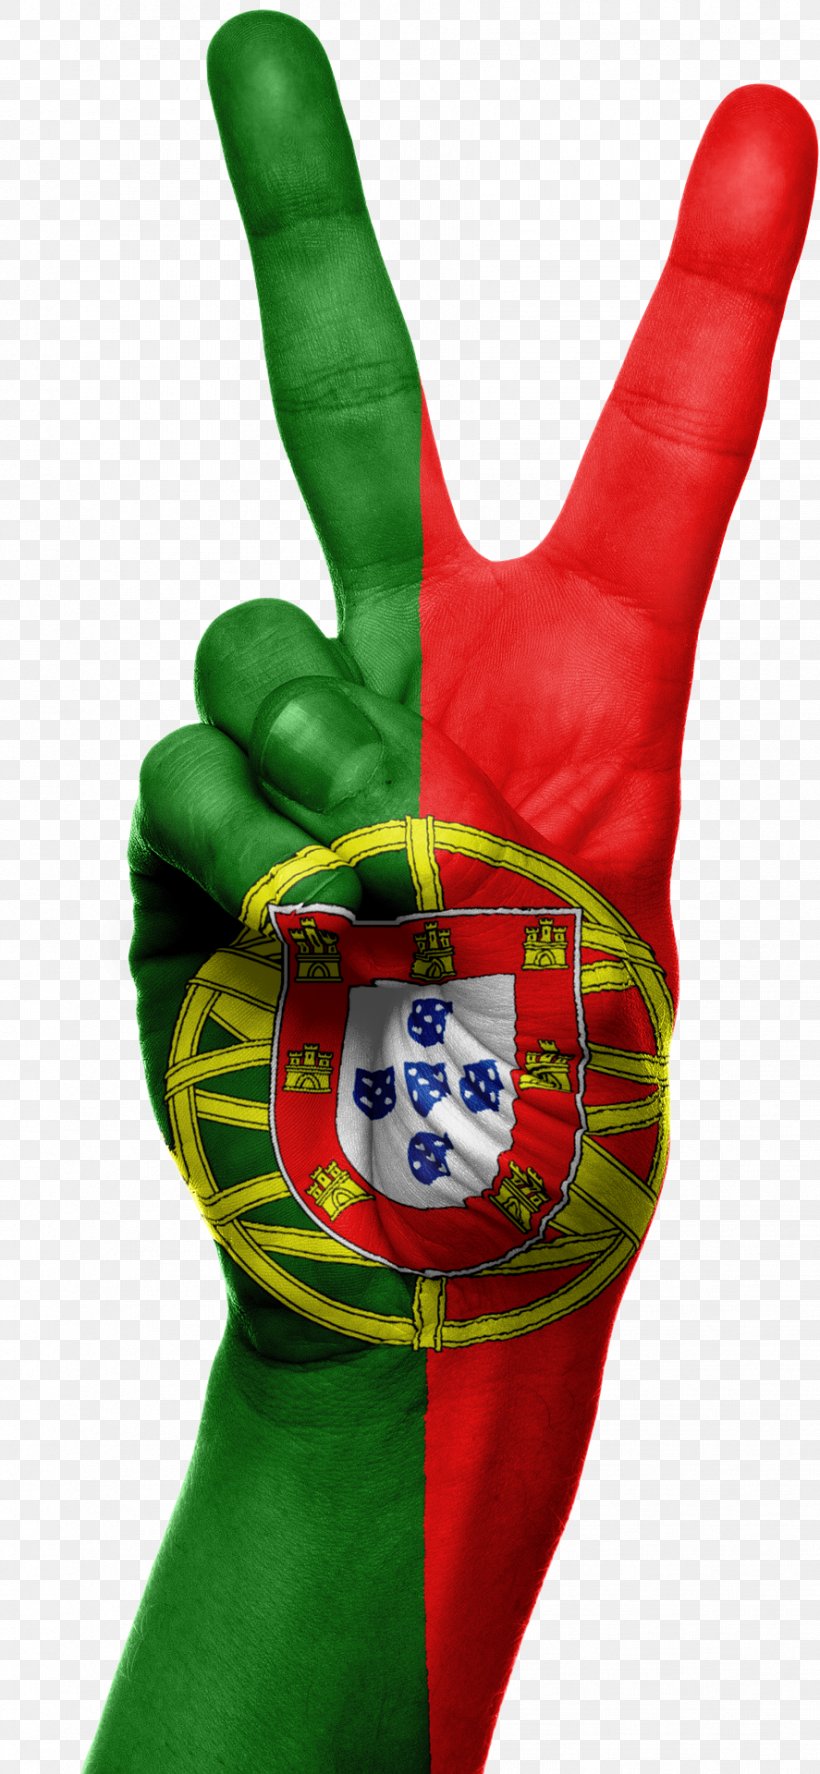 Flag Of Portugal Portugal National Football Team Portuguese Empire 5 October 1910 Revolution, PNG, 887x1920px, 5 October 1910 Revolution, Portugal, Coat Of Arms Of Portugal, Cristiano Ronaldo, Fictional Character Download Free